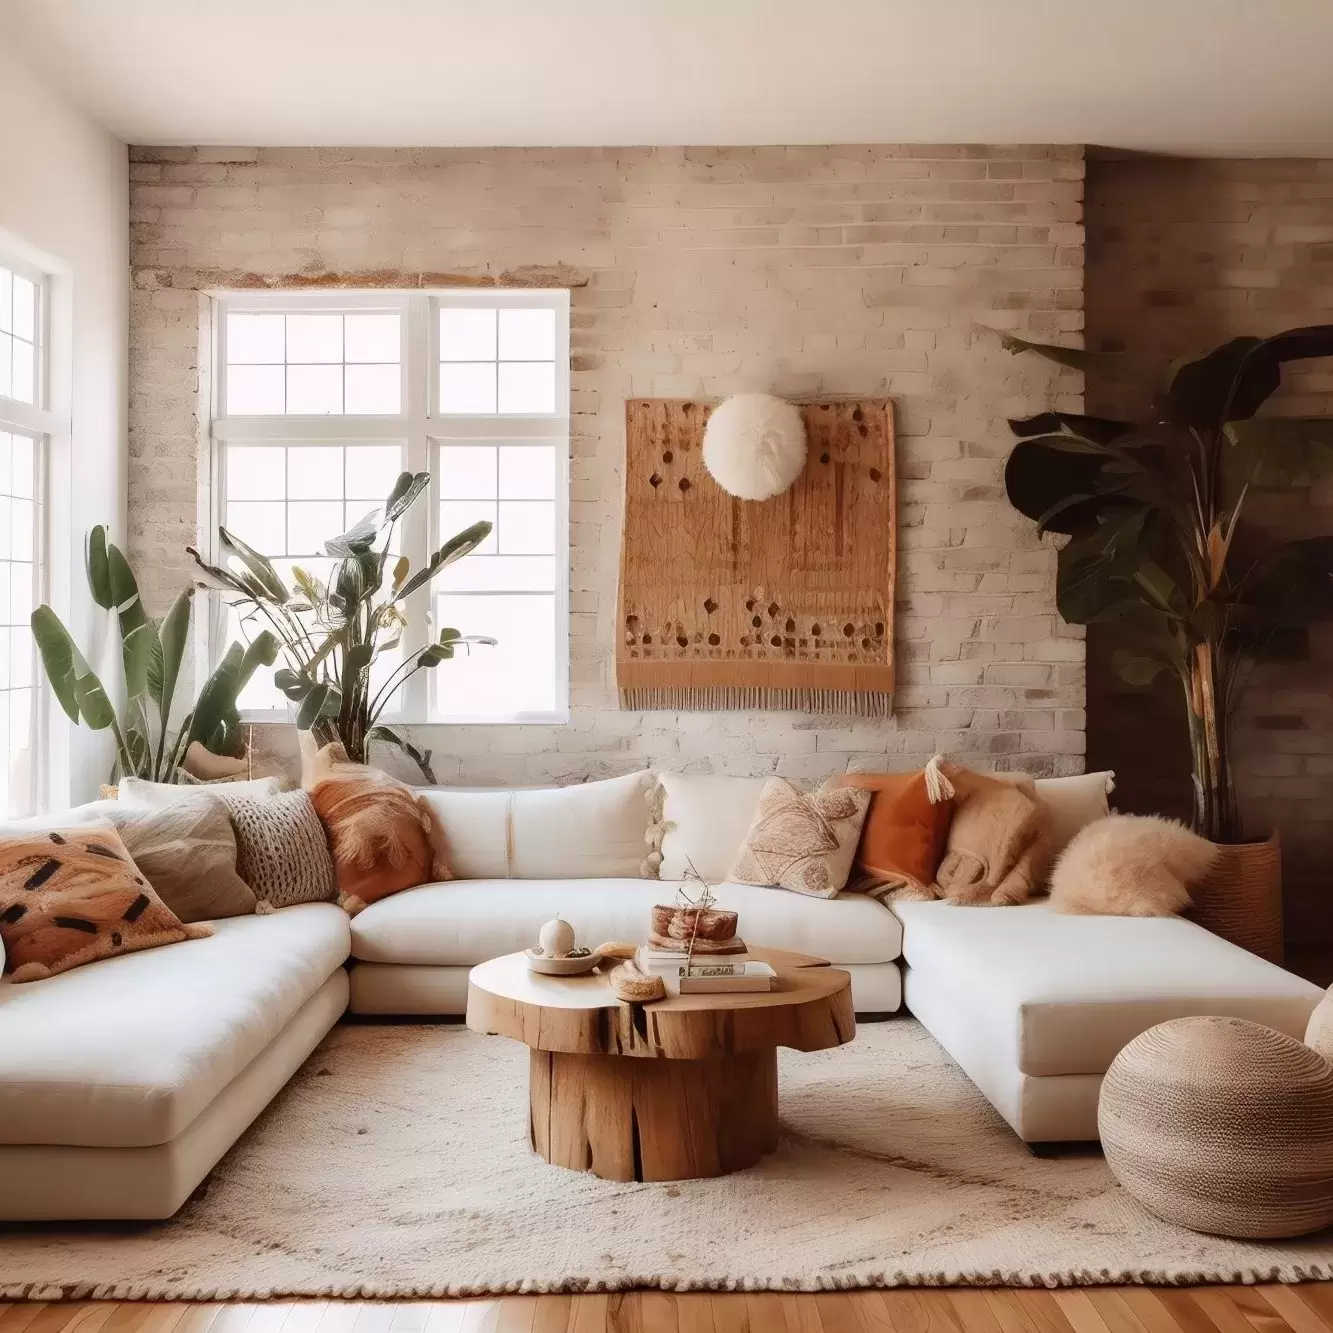 A beautifully decorated apartment with neutral earth tones throughout.